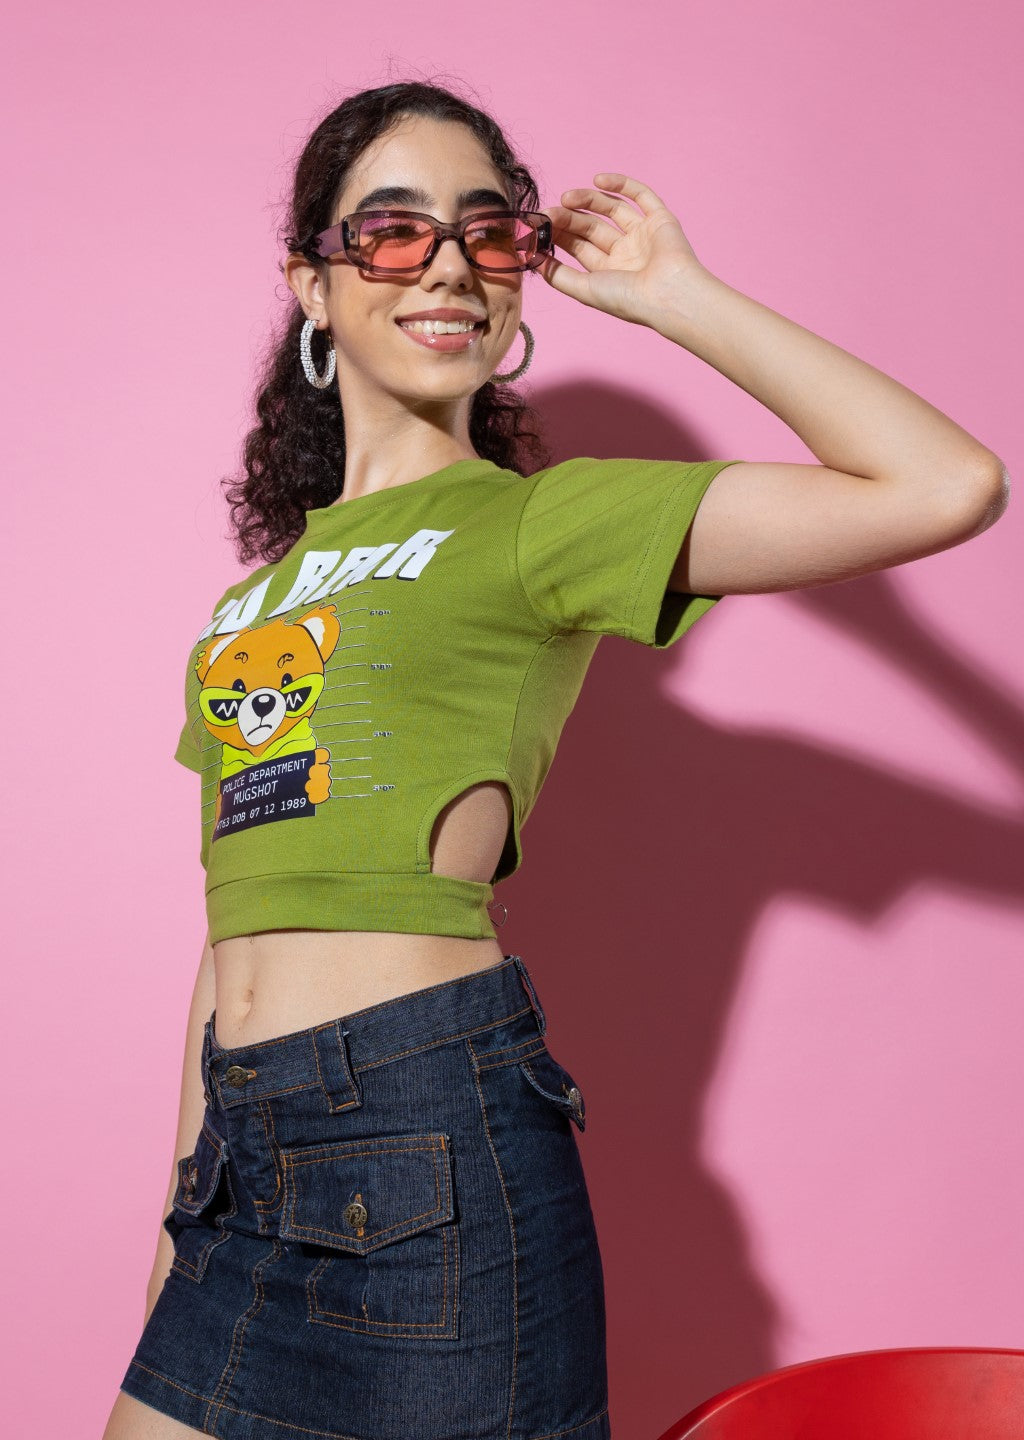 Bad Bear Side Cut-Out Crop Top